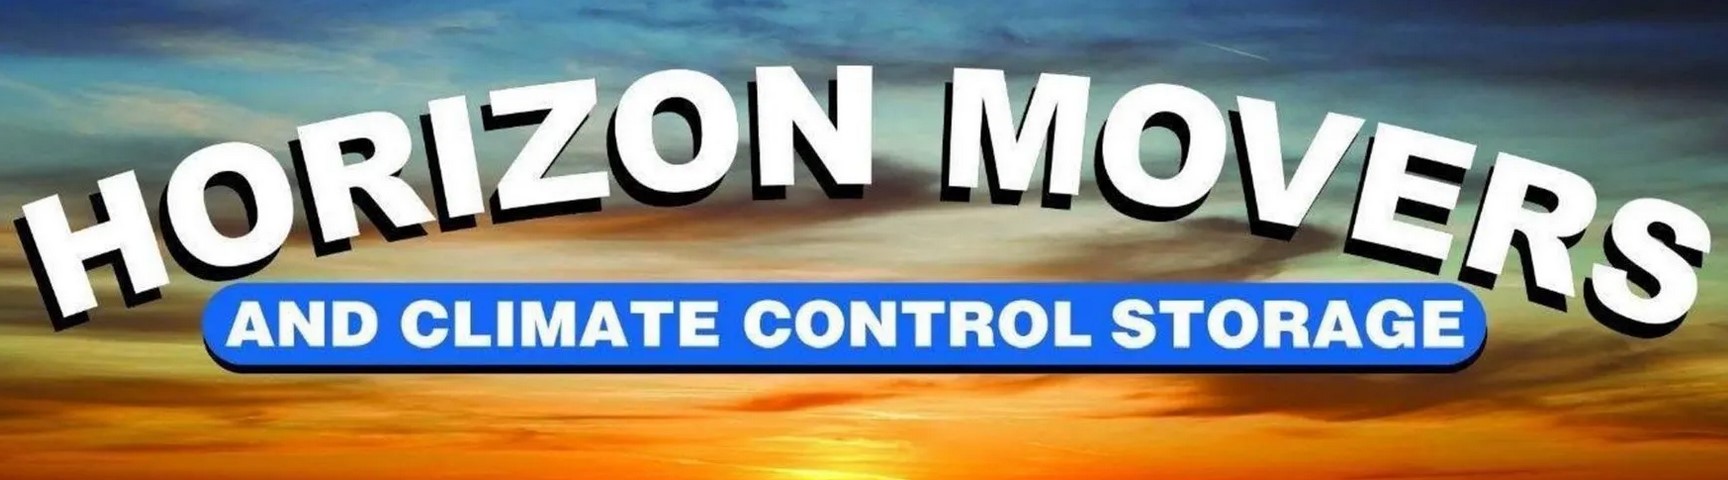 Horizon Movers and Climate Control Storage